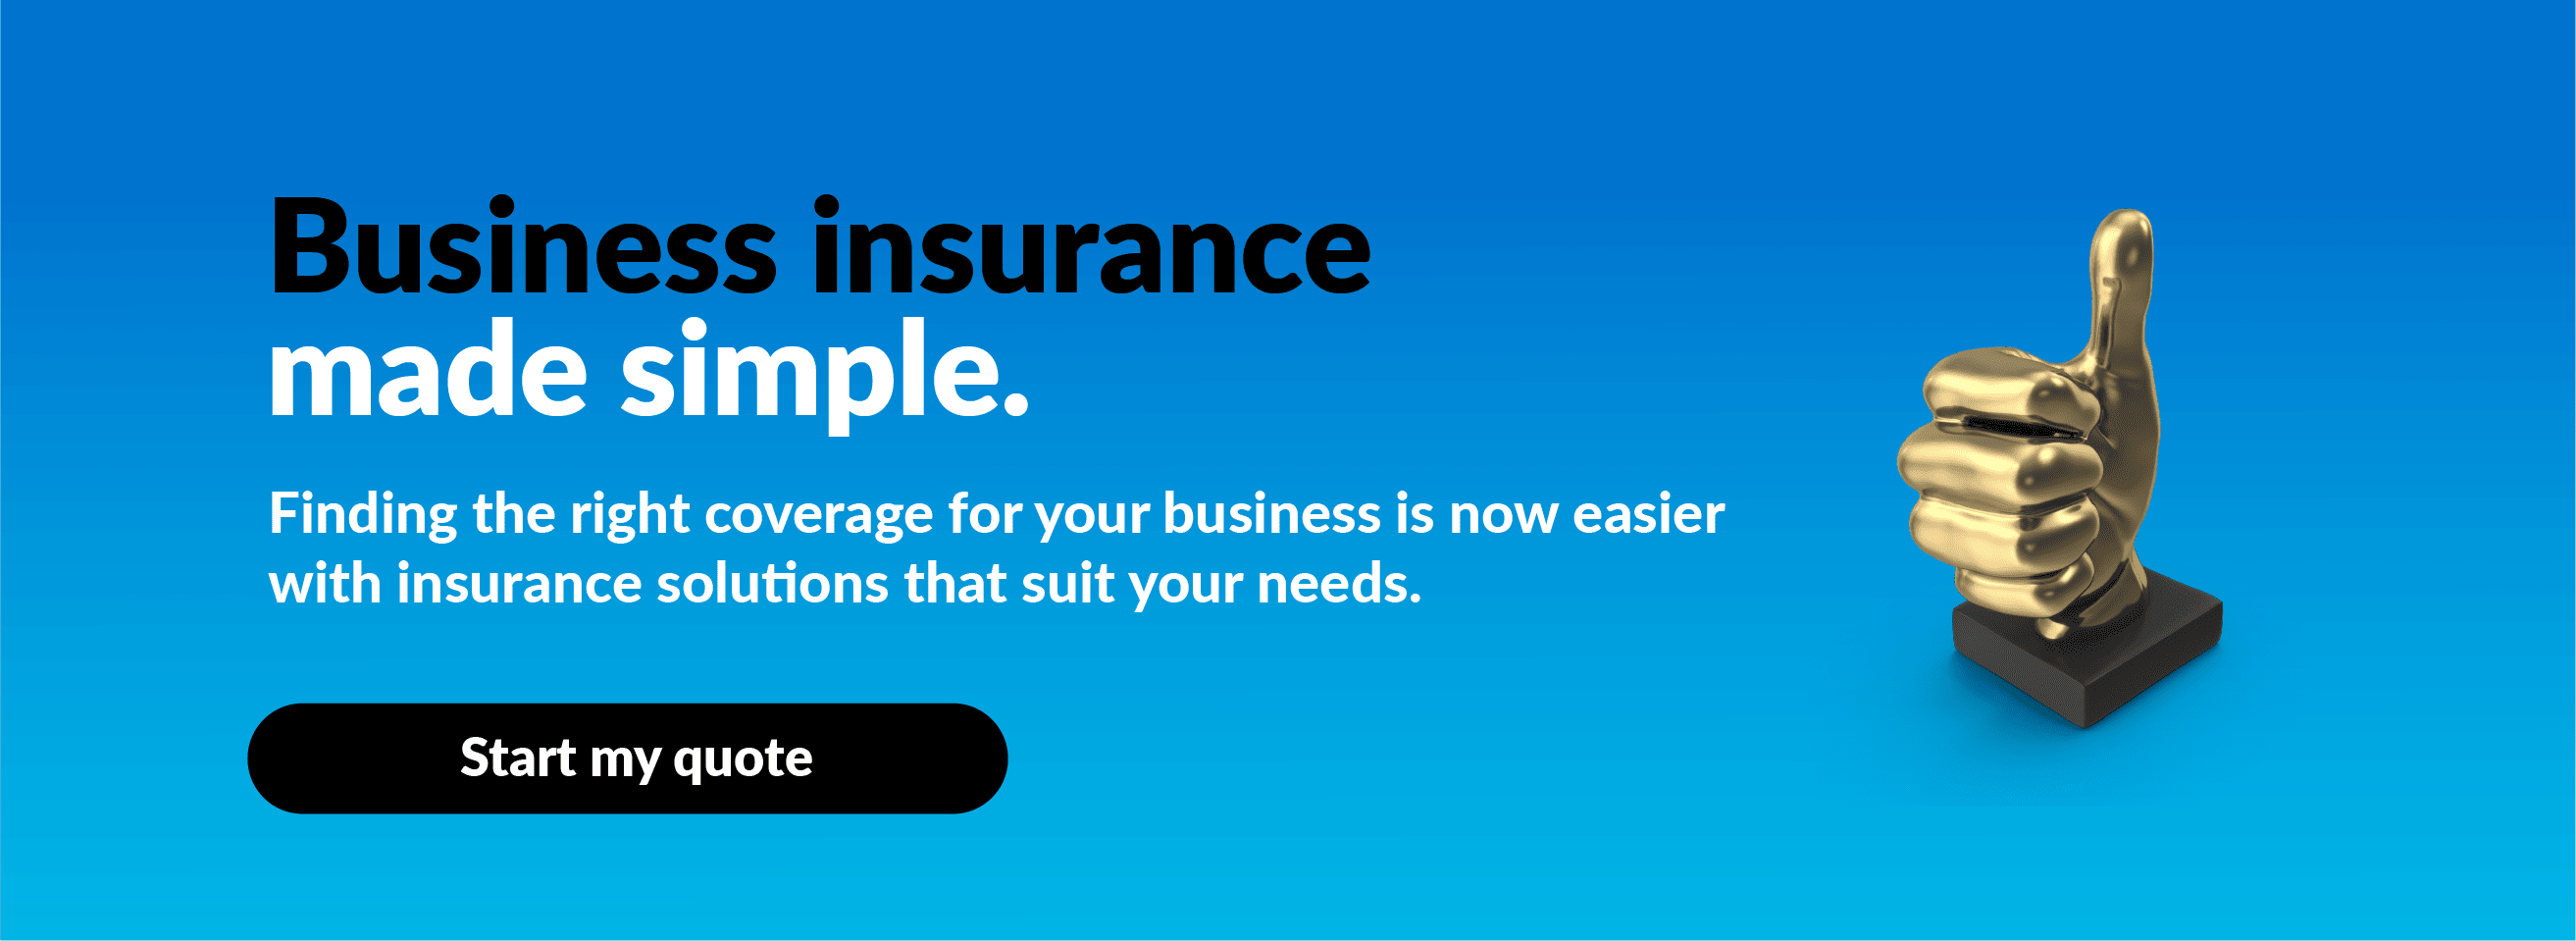 Business insurance made simple. Finding the right coverage for your business is now easier with insurance solutions that suit your needs. Start my quote